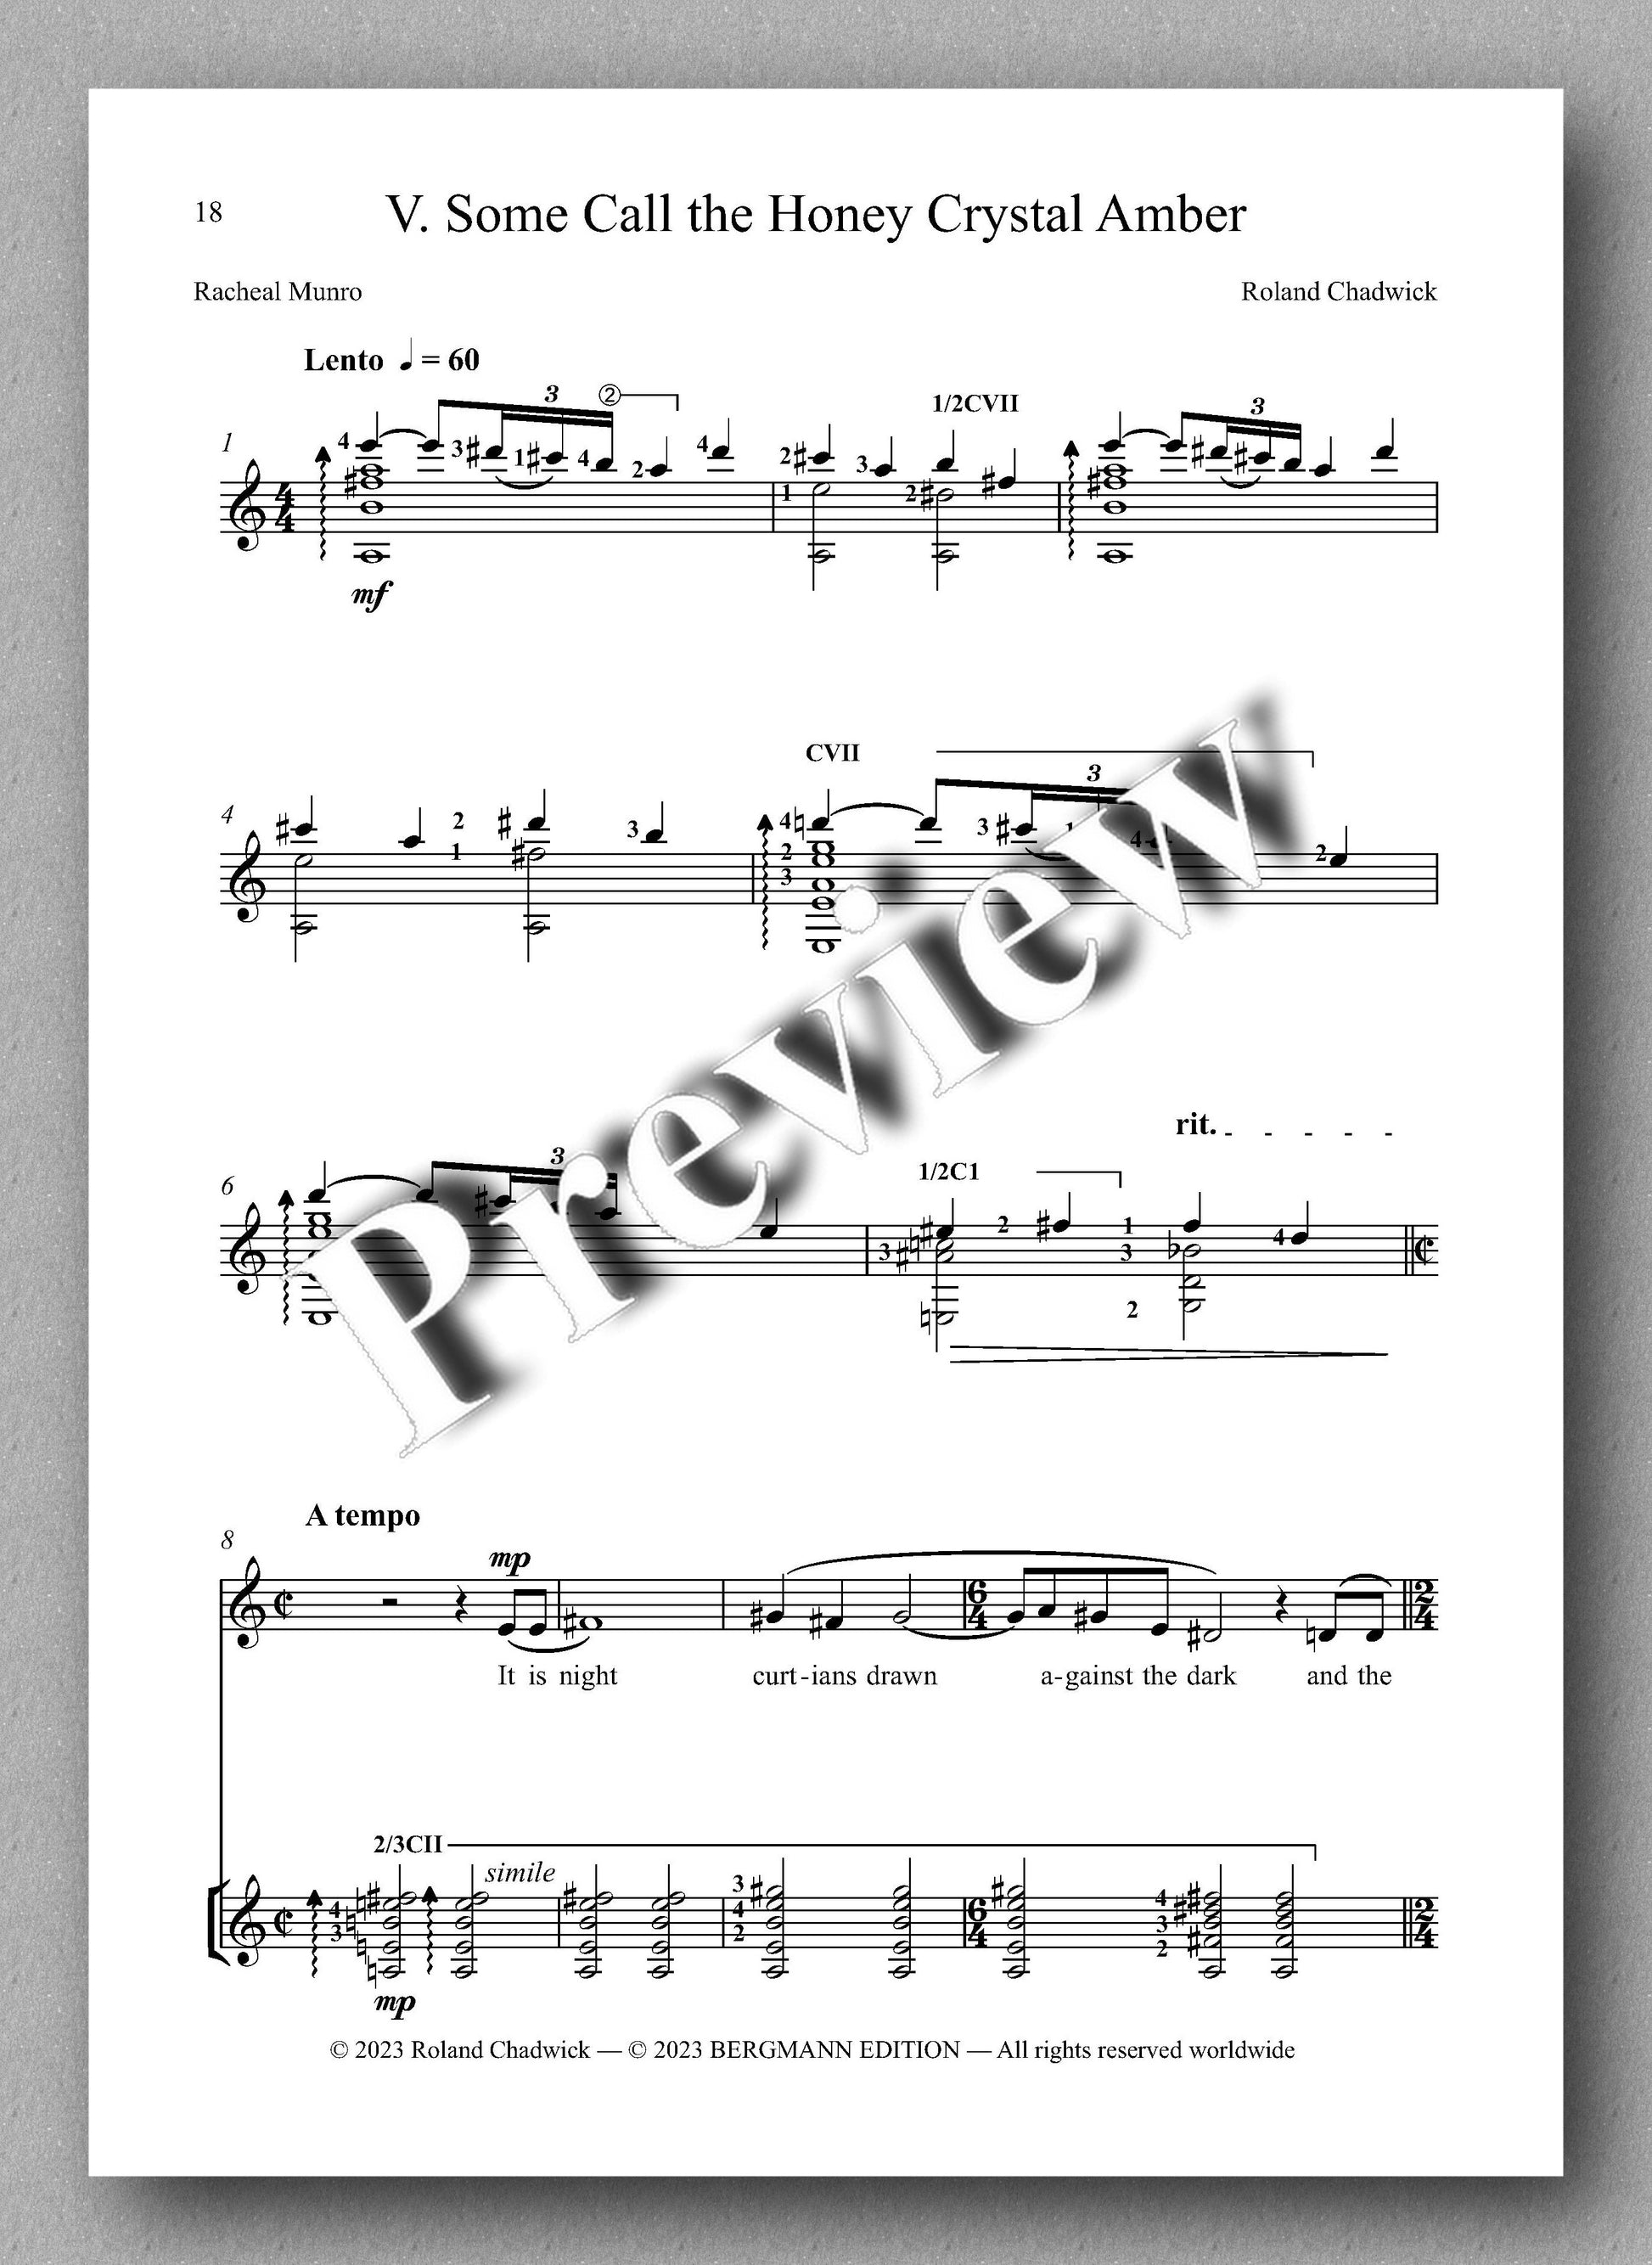 Roland Chadwick, Like Honey Thickly Golden - preview of the music score 5